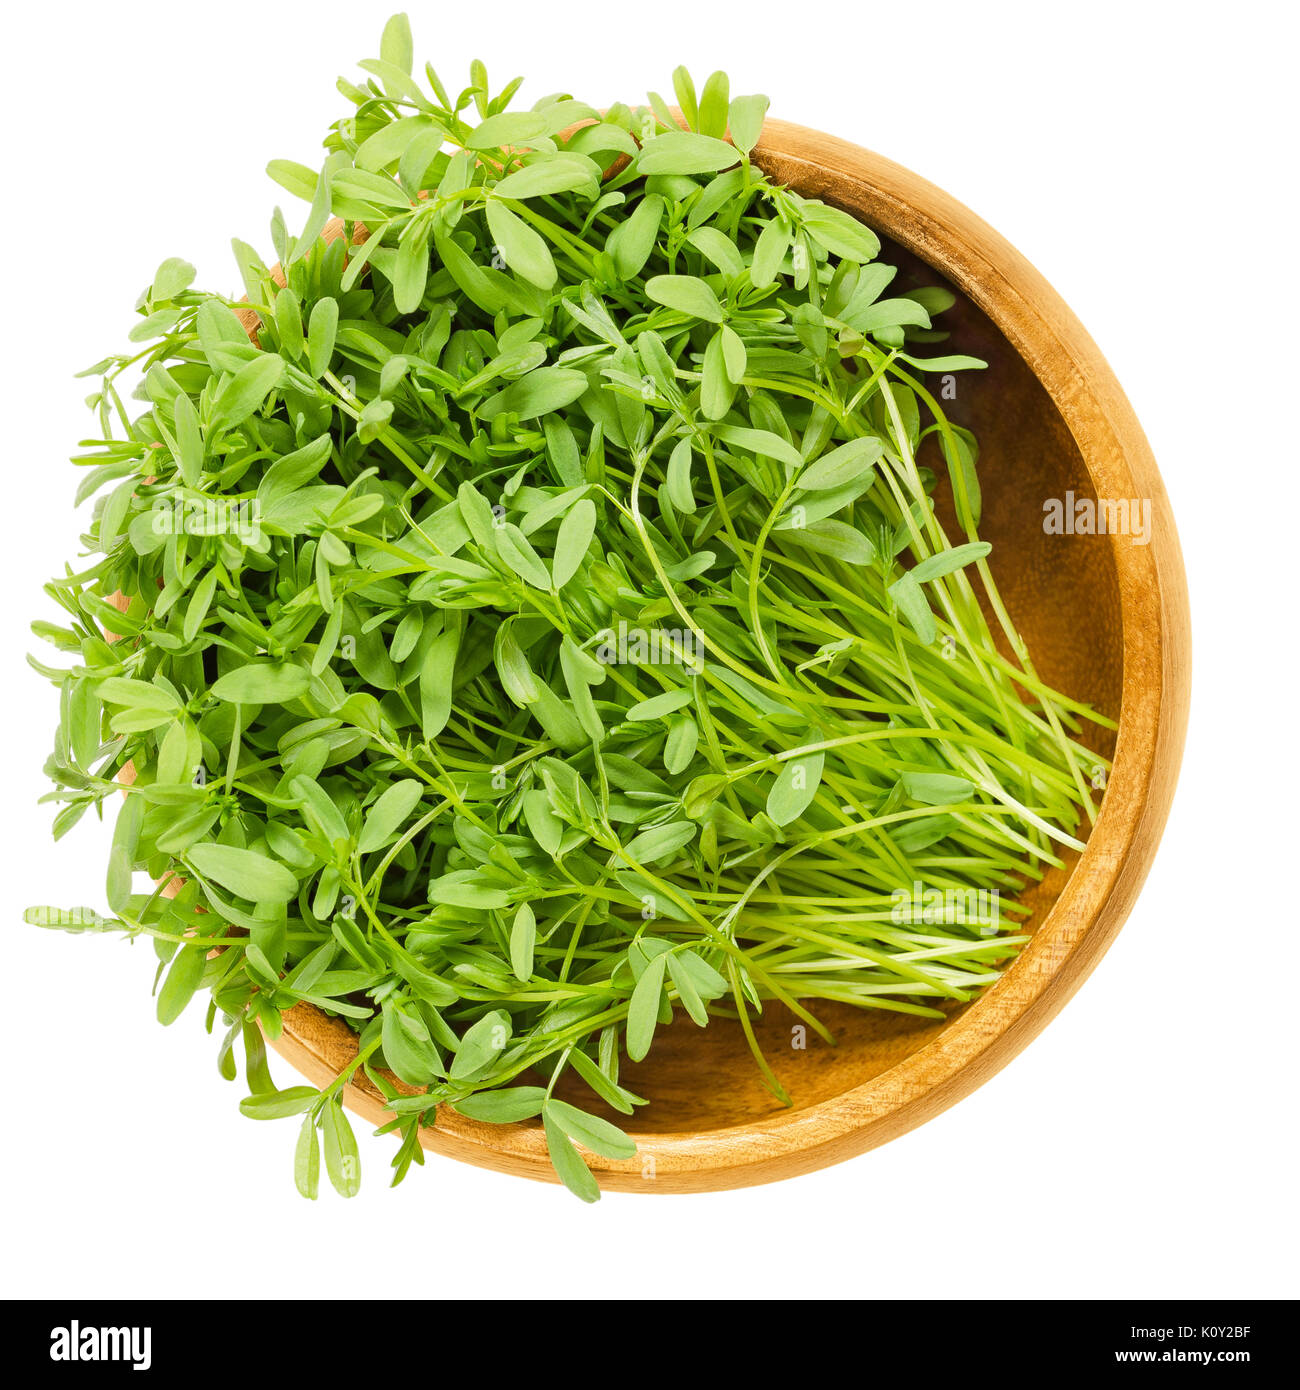 Le Puy green lentil sprouts in wooden bowl. Seedlings and cotyledons of Lens esculenta puyensis from Le Puy in Auvergne, France. Vegetable. Microgreen Stock Photo